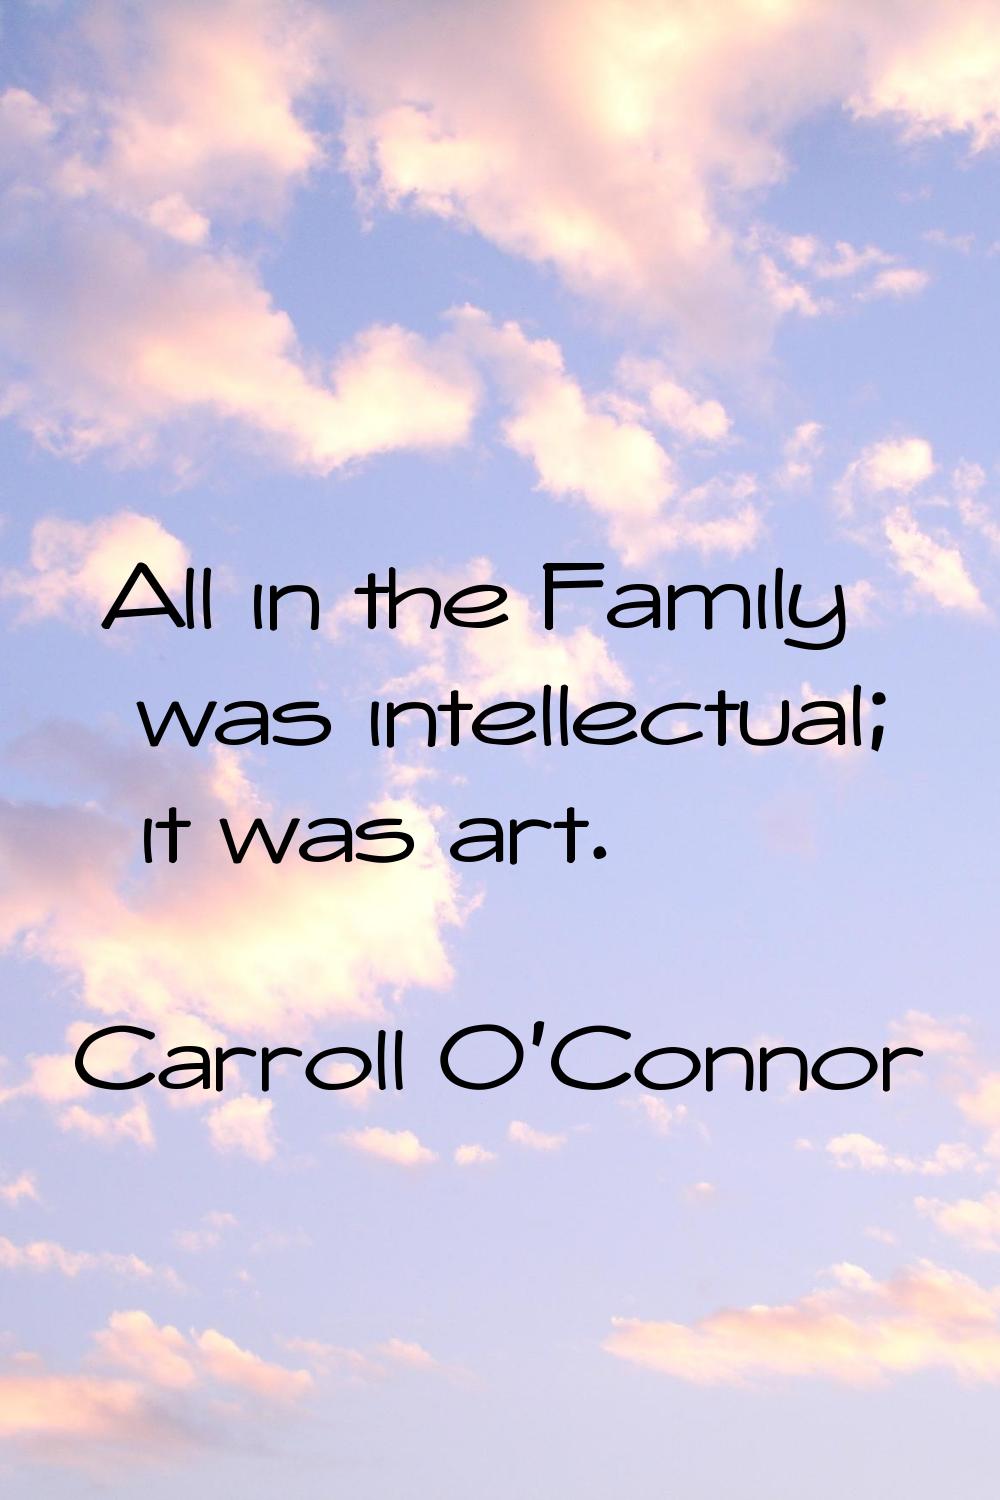 All in the Family was intellectual; it was art.